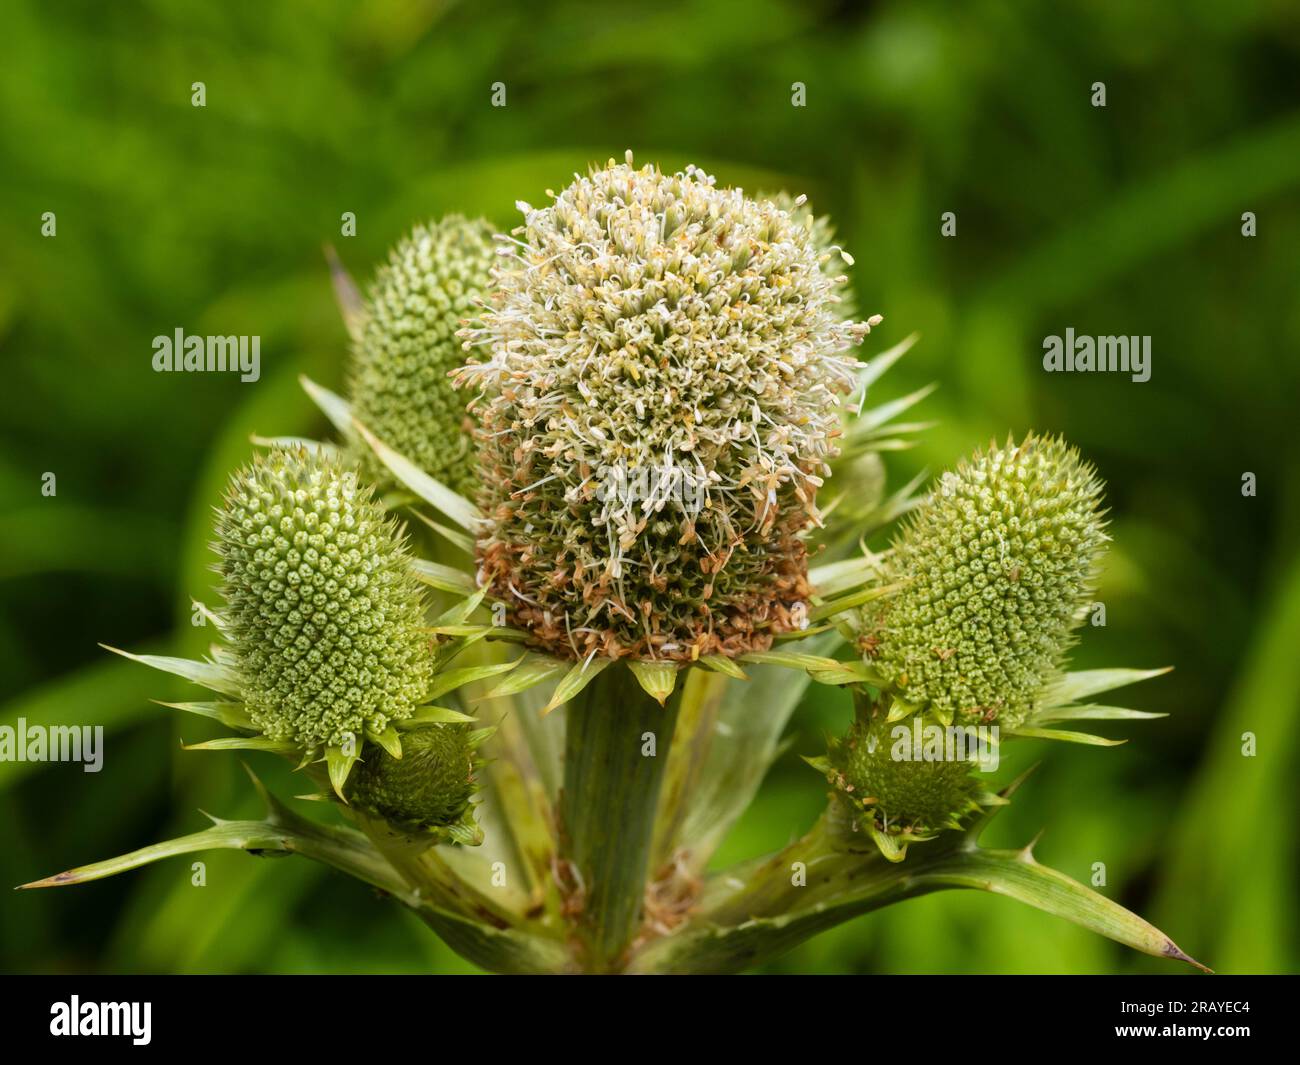 Pale flower heads of the hardy perennial agave leaved sea holly, Eryngium agavifolium Stock Photo